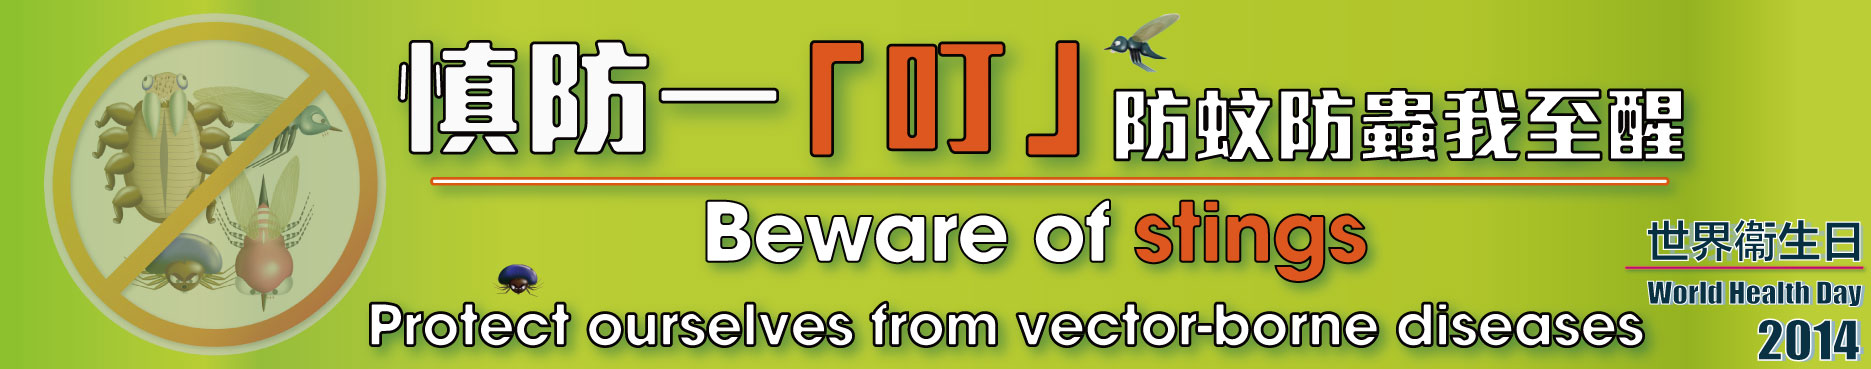 Beware of stings
Protect ourselves from vector-borne diseases